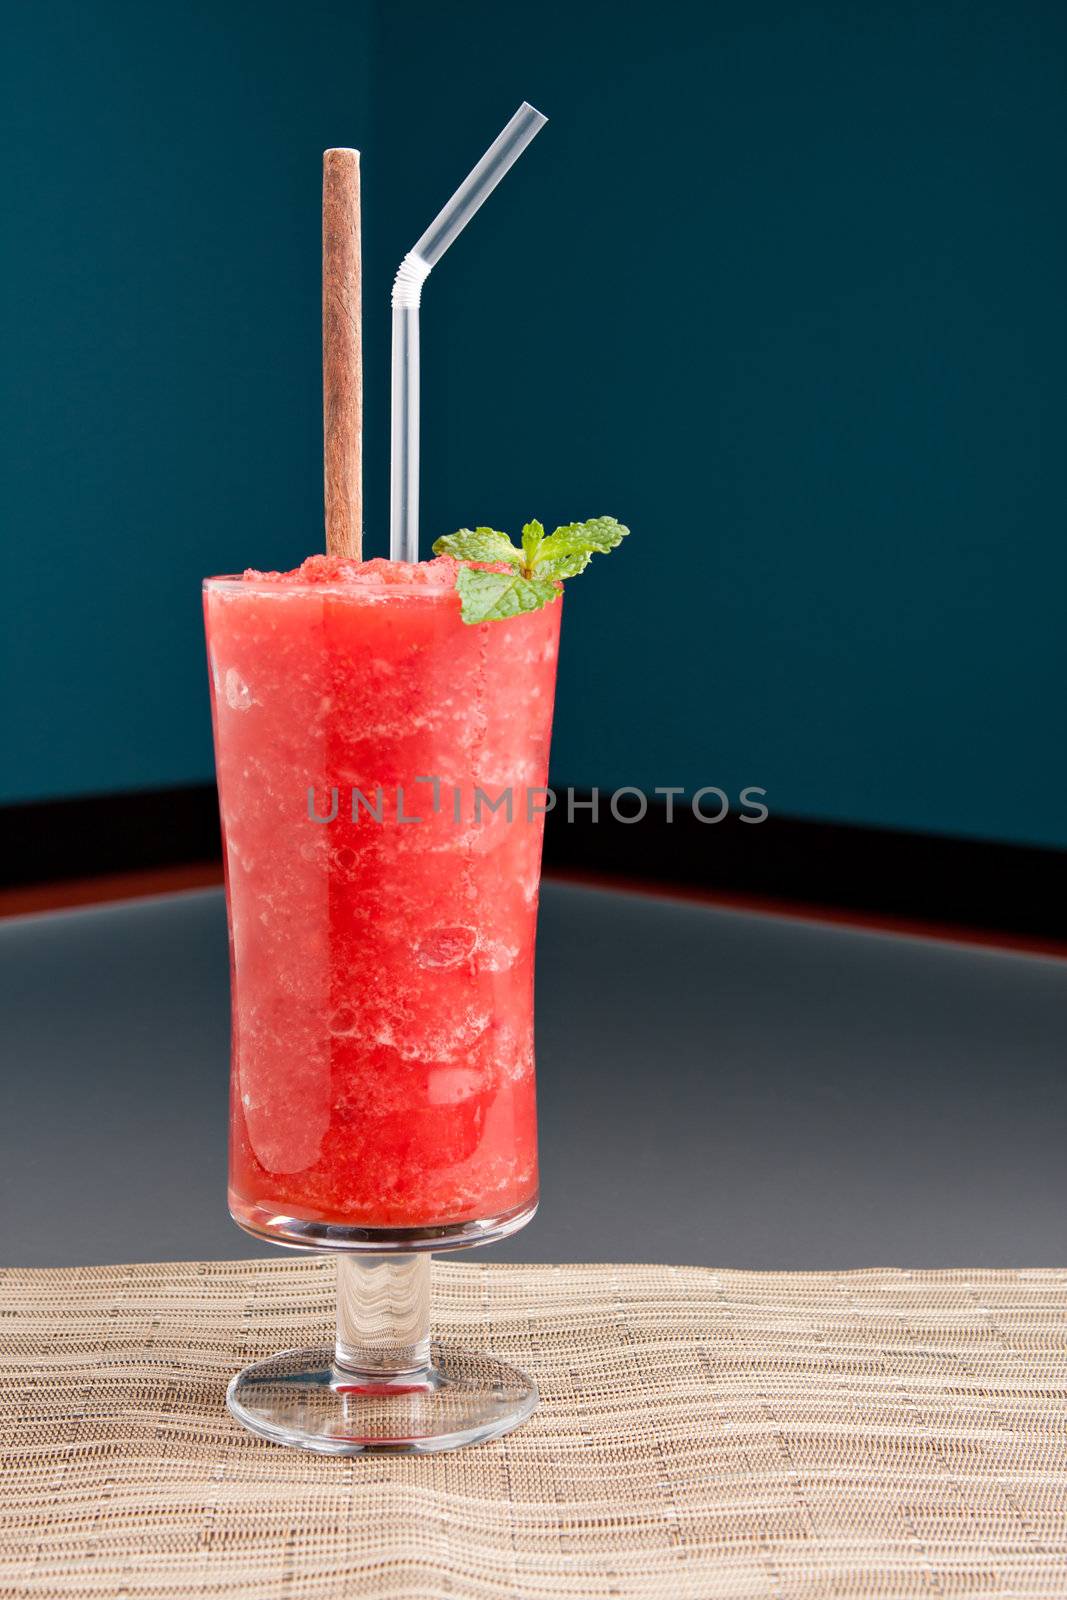 Red fruit flavored frozen cocktail or smoothie beverage with straw and stirring stick.